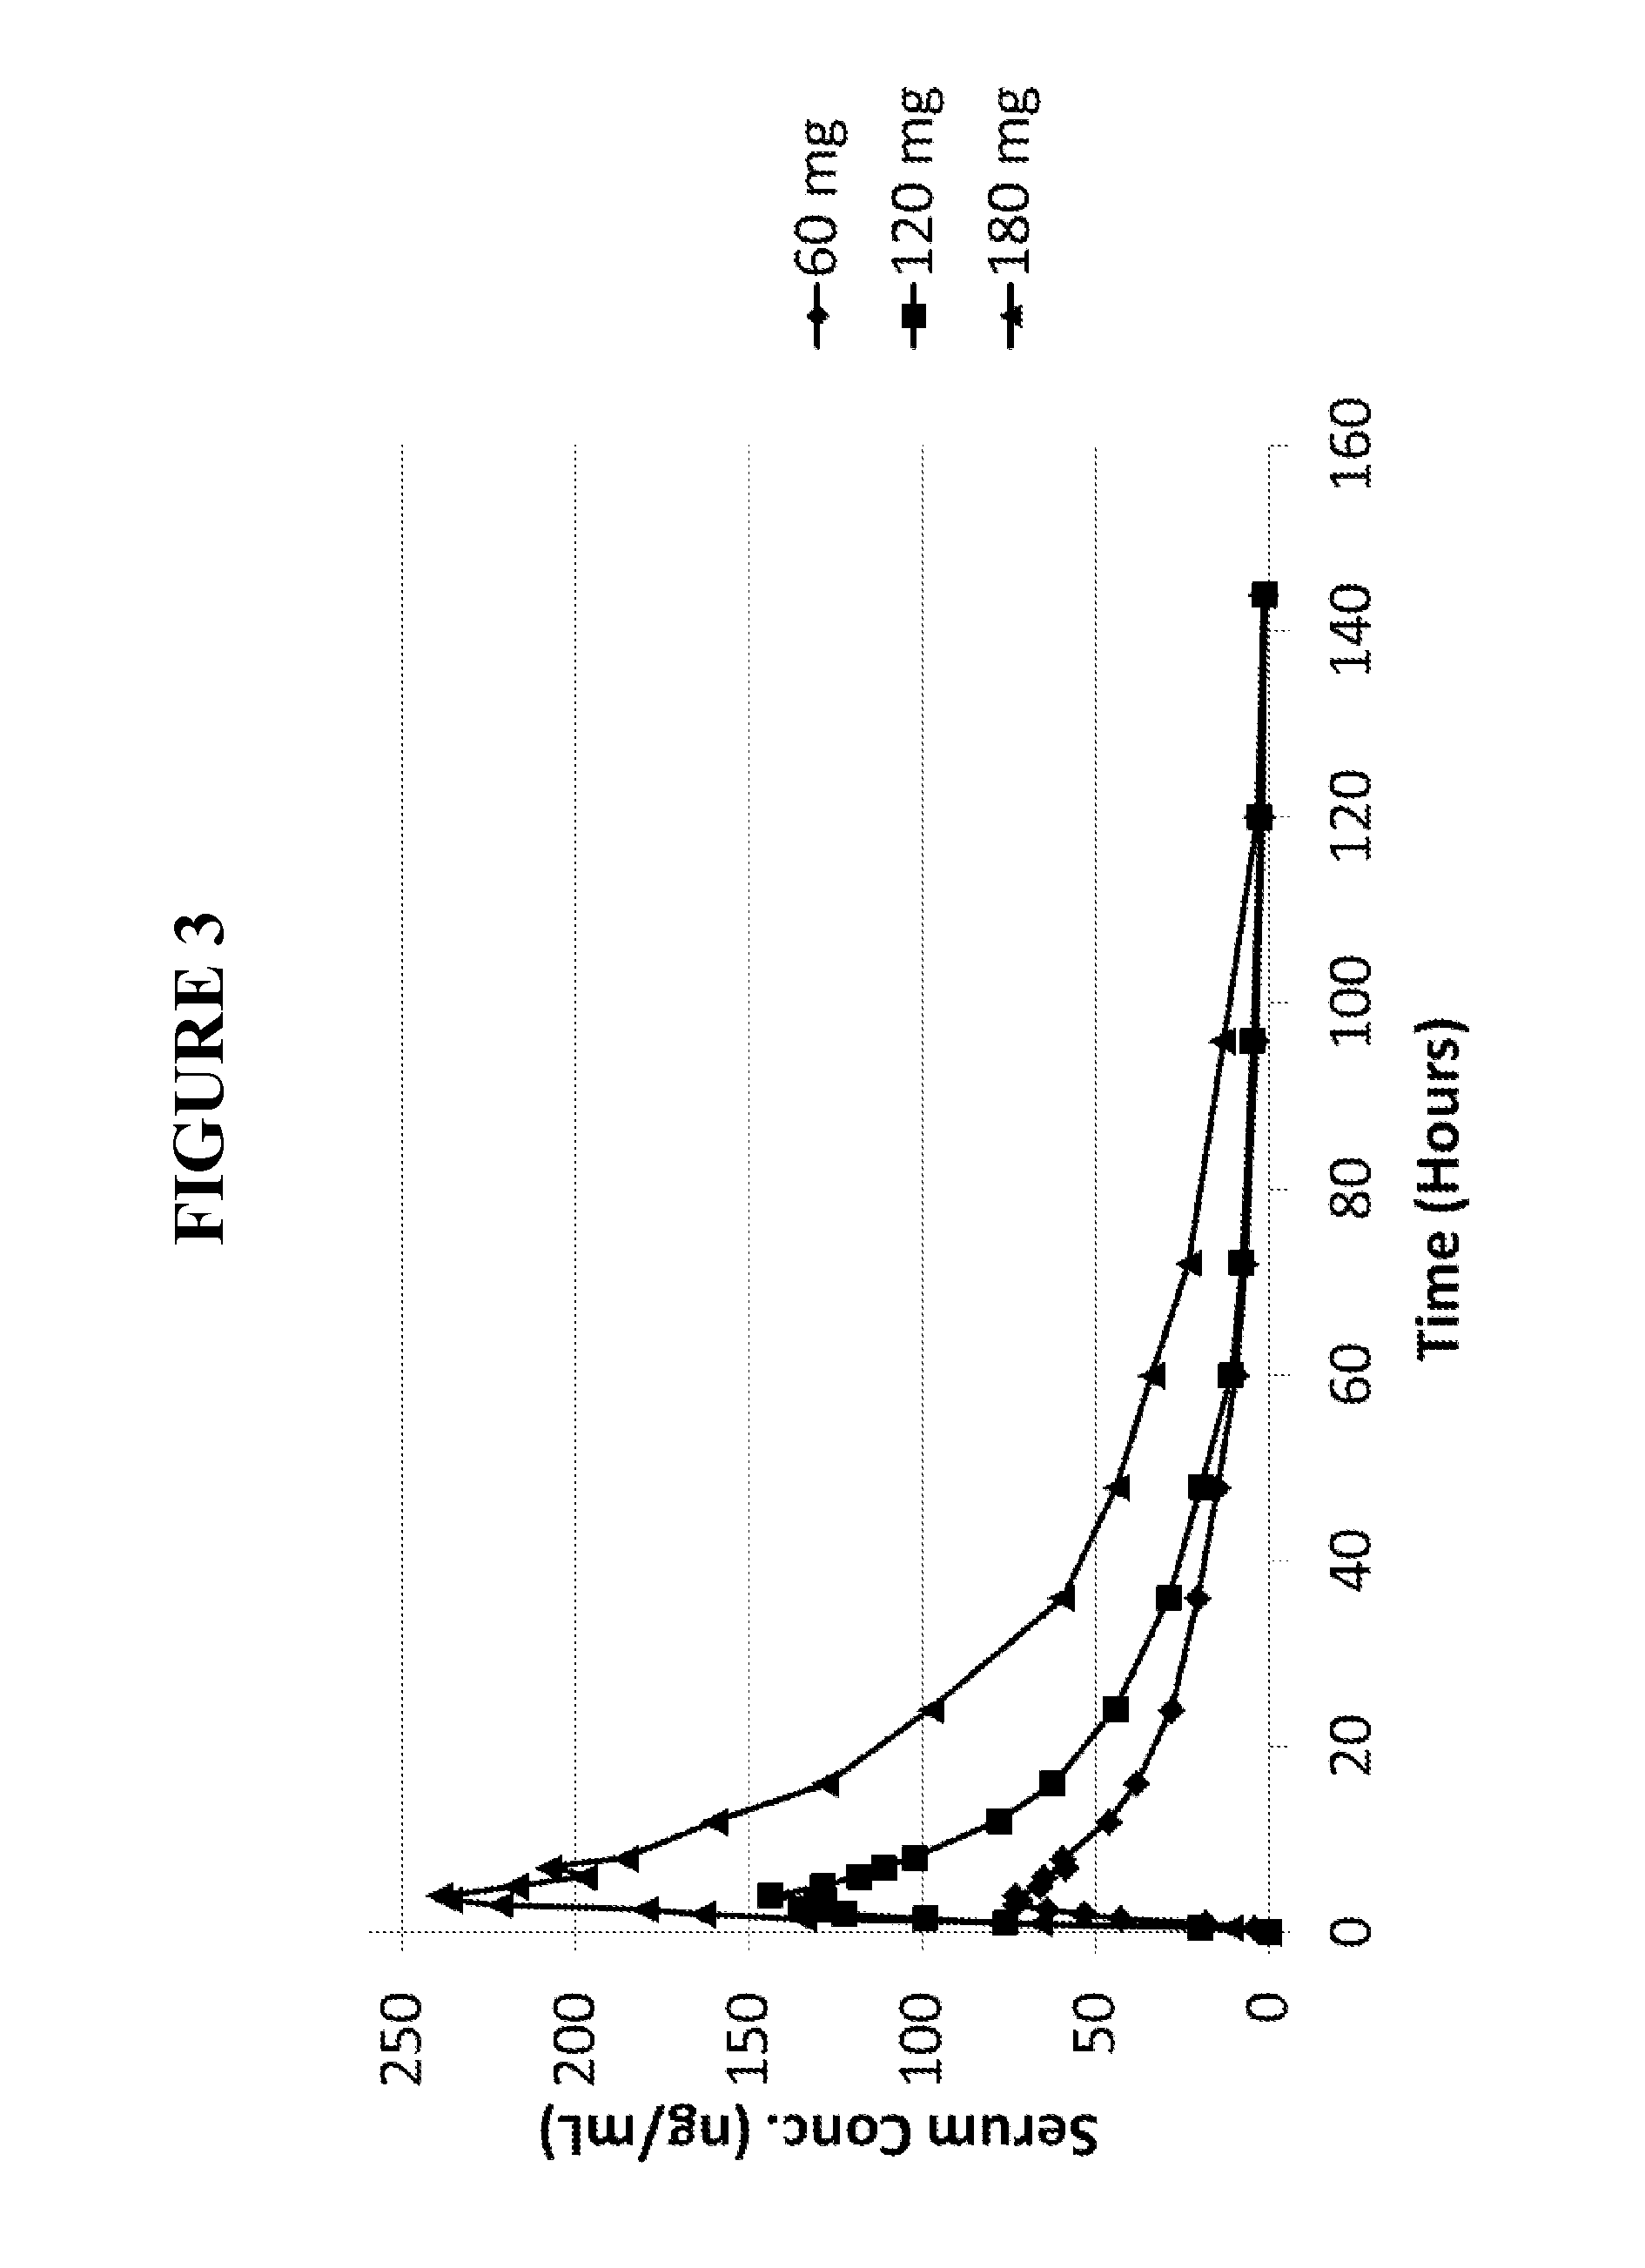 Methods for acute and long-term treatment of drug addiction